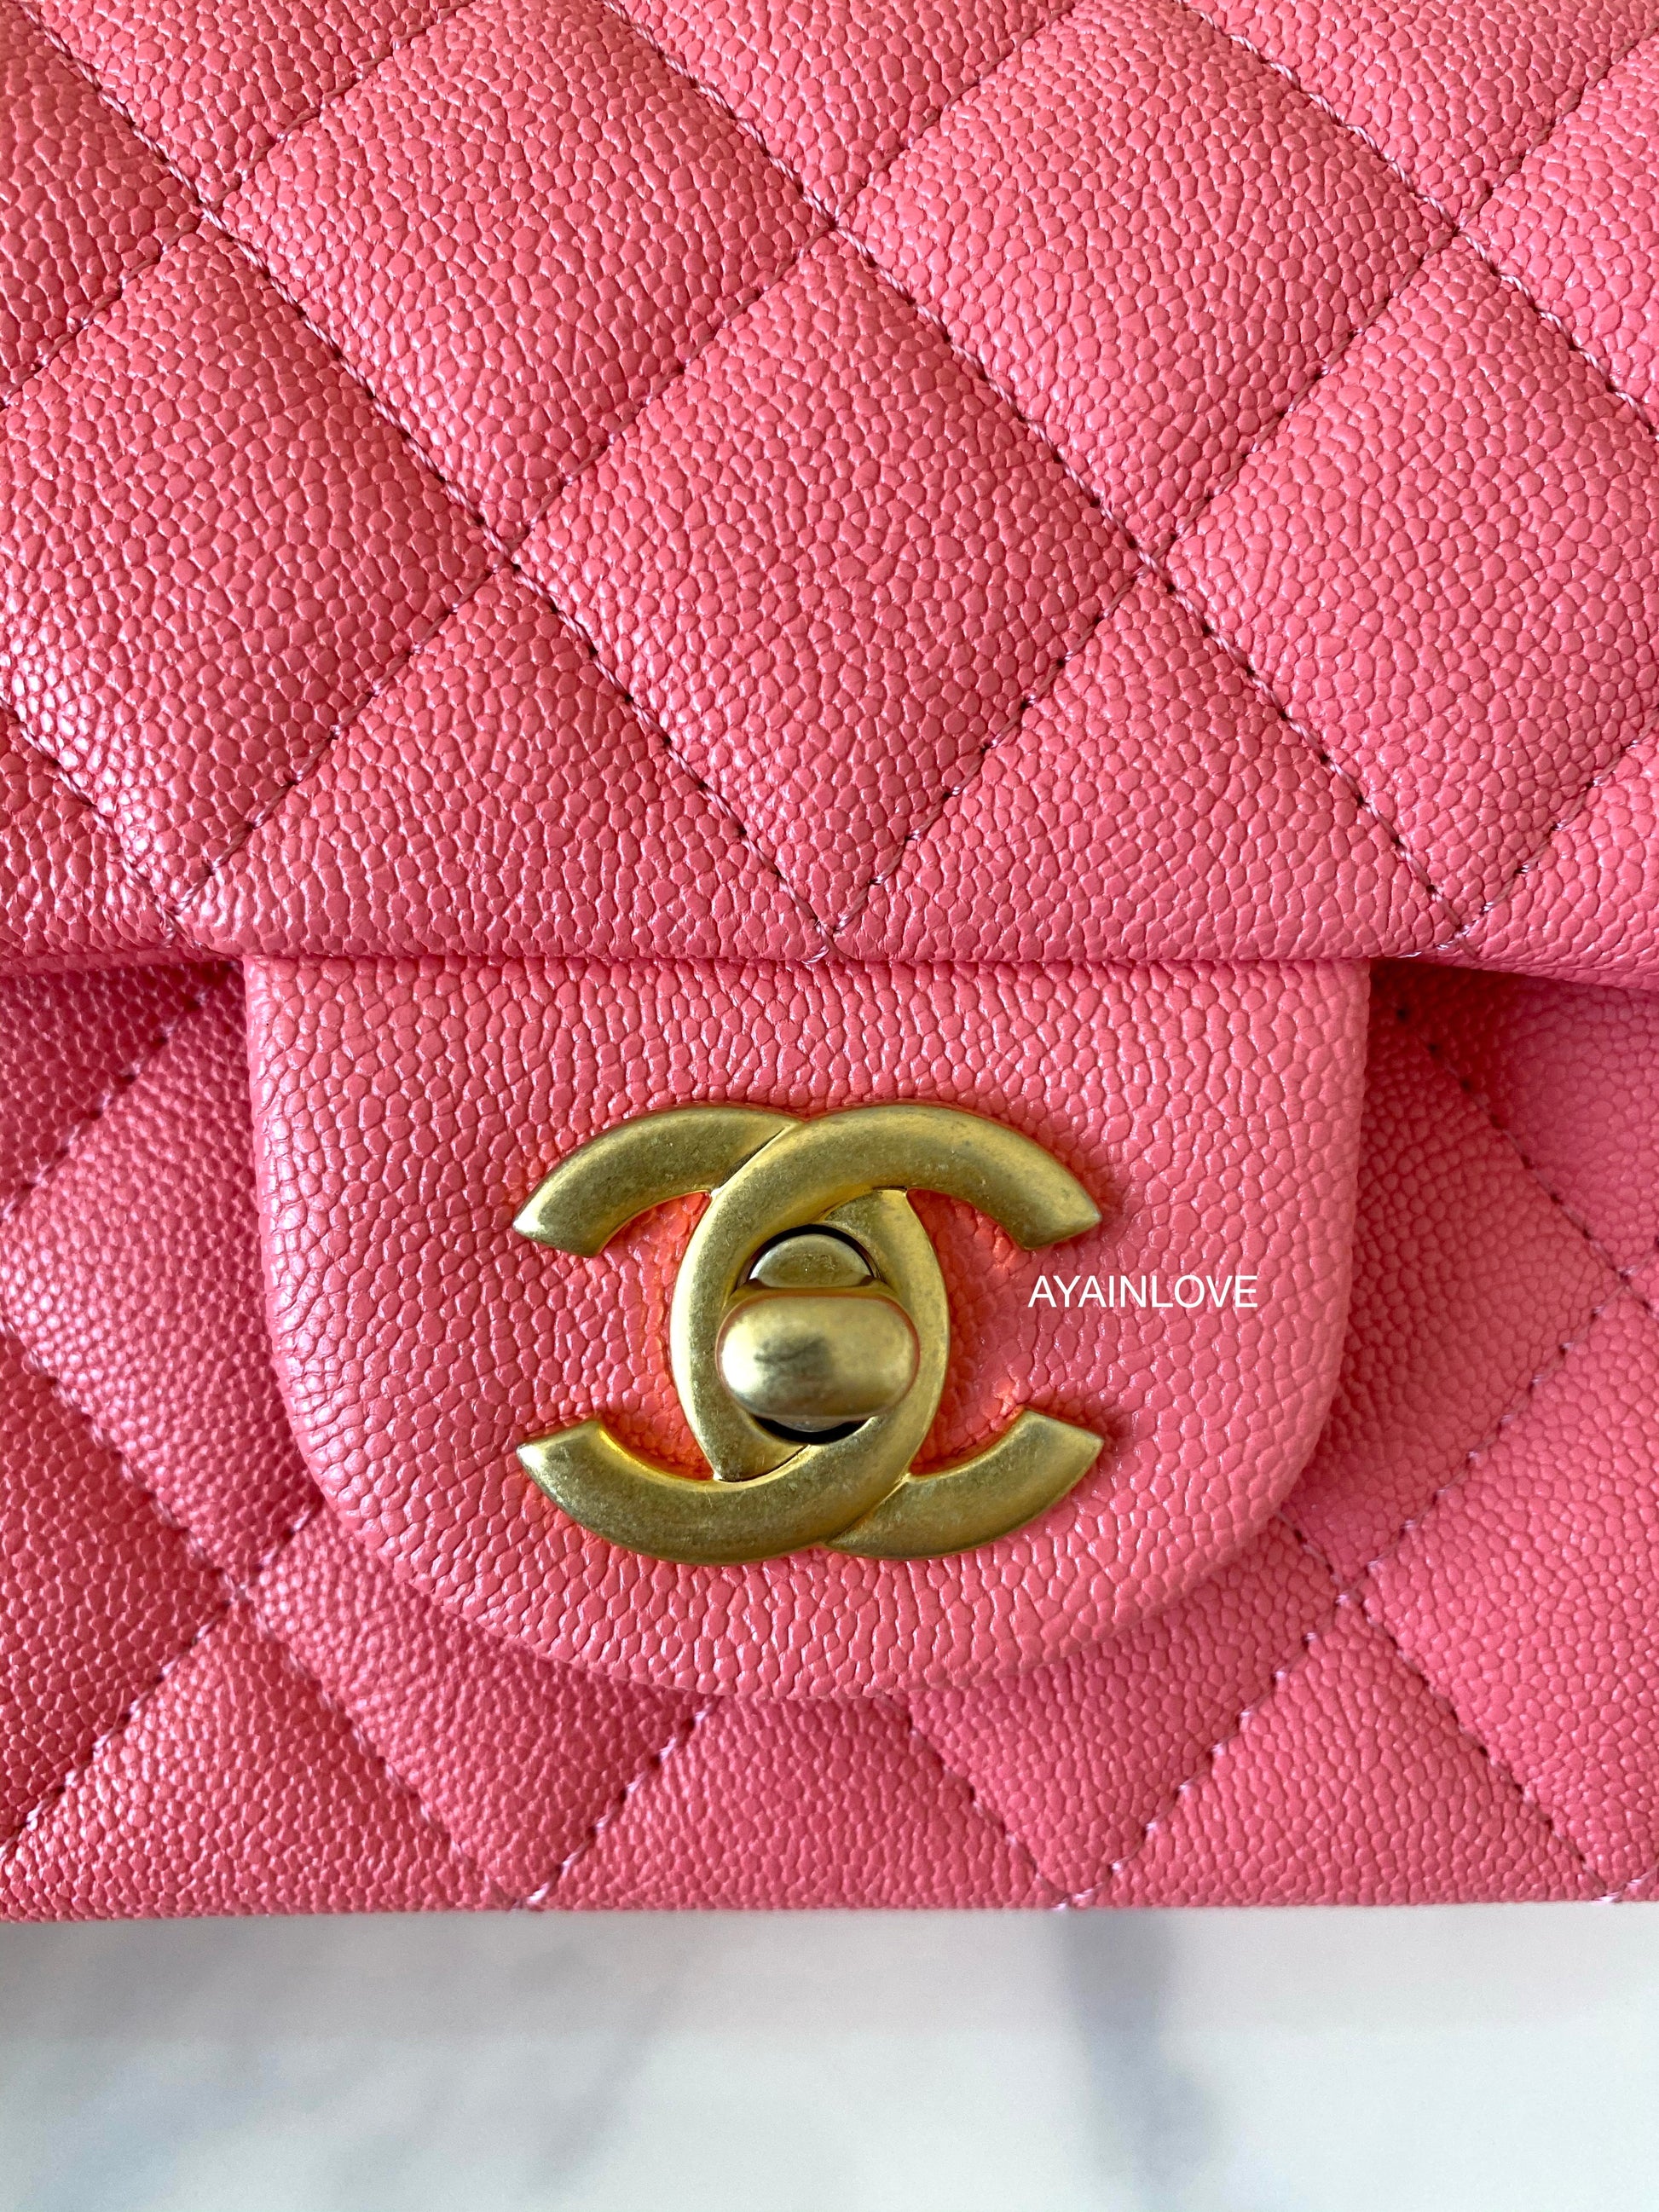 My Thoughts On The NEW CHANEL MINI WITH TOP HANDLE From 21S